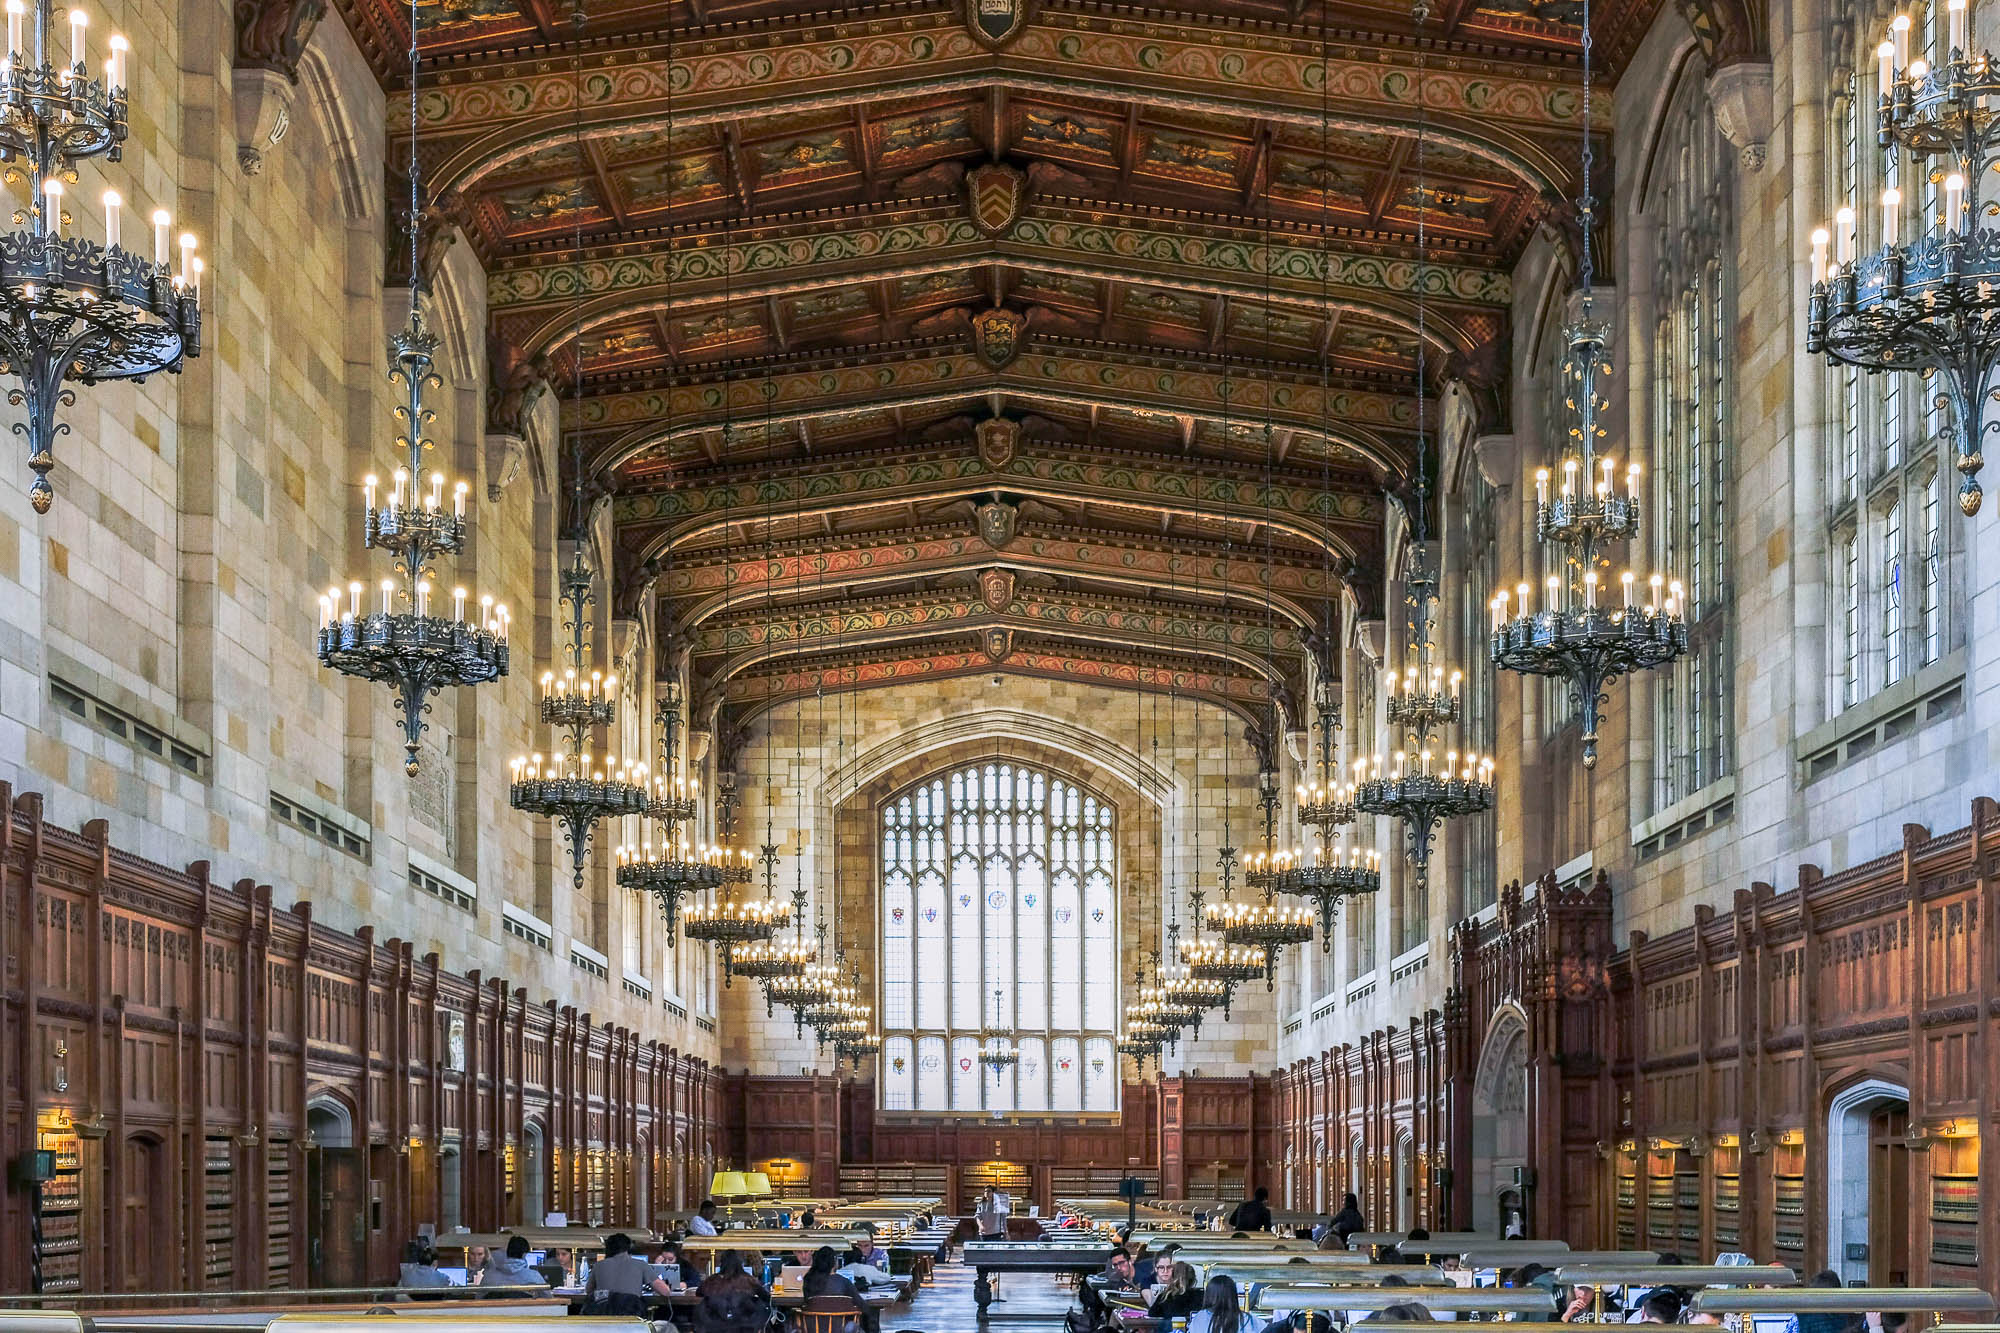 Image of the Cook Library, a neogothic reading room with a decorated ceiling and chandeliers.